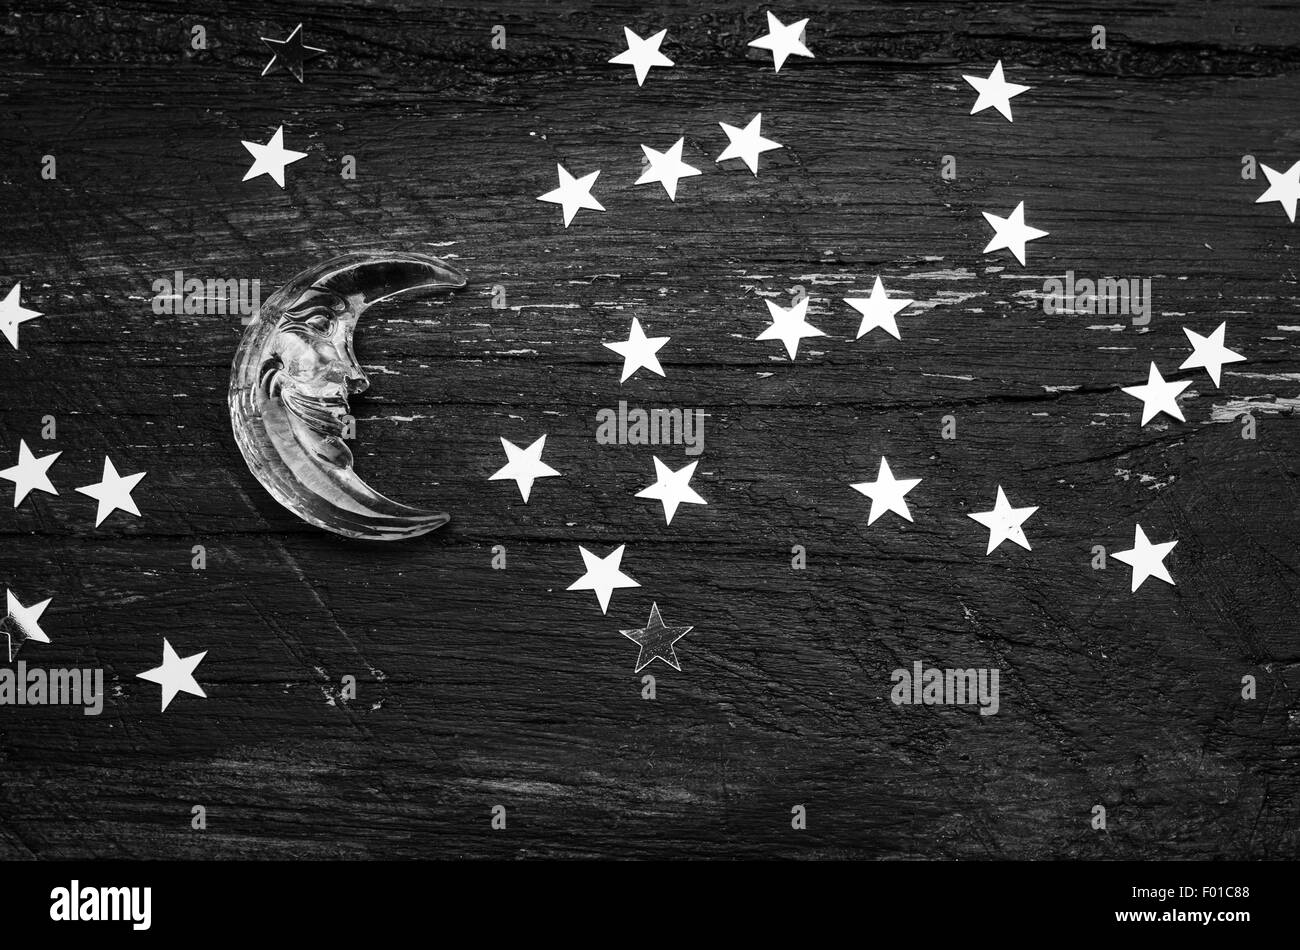 Glitter golden stars and glass moon on grunge wood background. Black and white photo Stock Photo